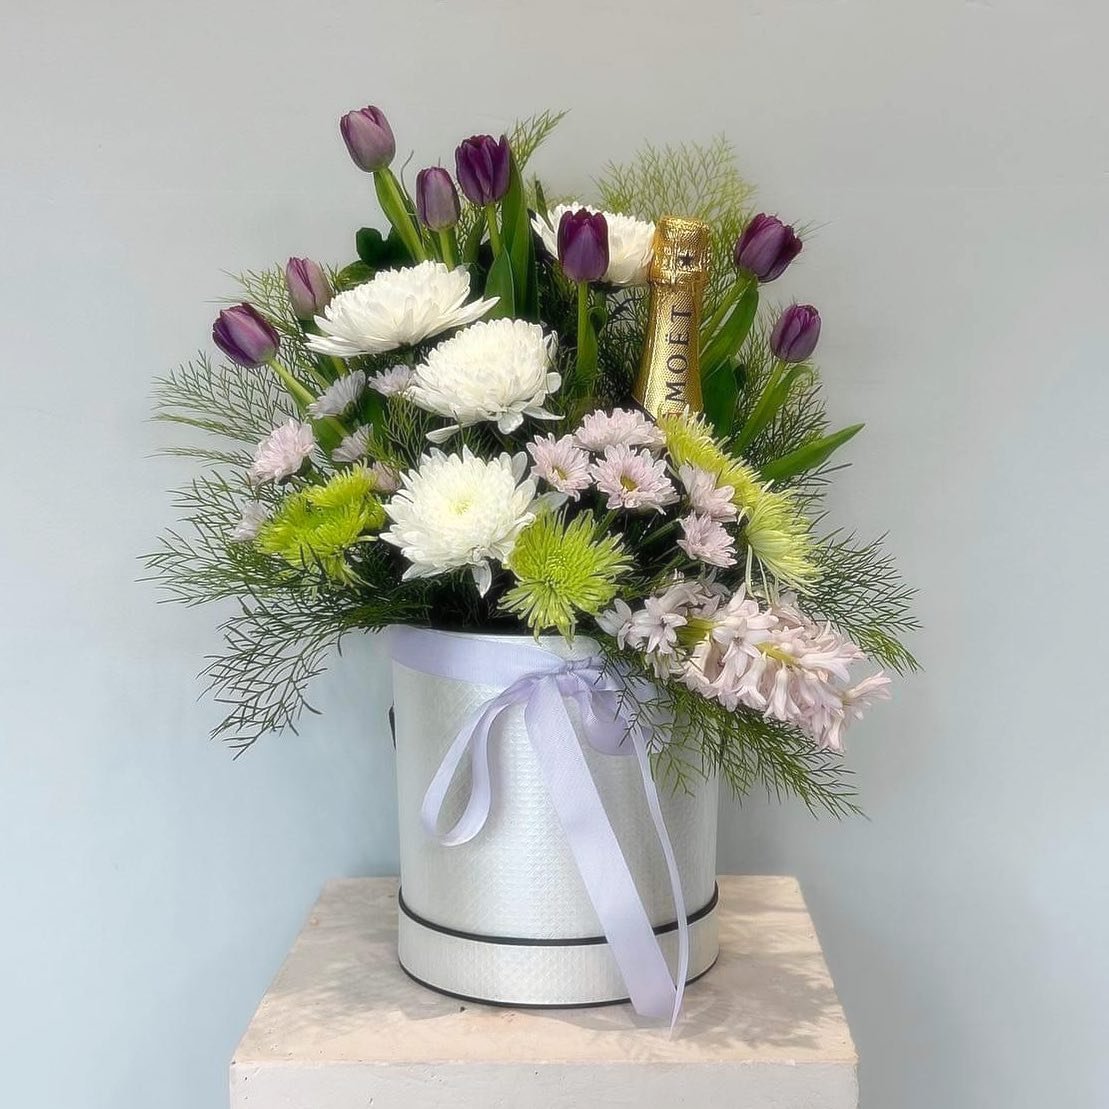 Stunning special order going out for a birthday today! M&ouml;et and flowers. What&rsquo;s not to love??! 💐❤️

If you&rsquo;re after something unique for that special someone, contact our team! We can work with any budget and personal style to make 